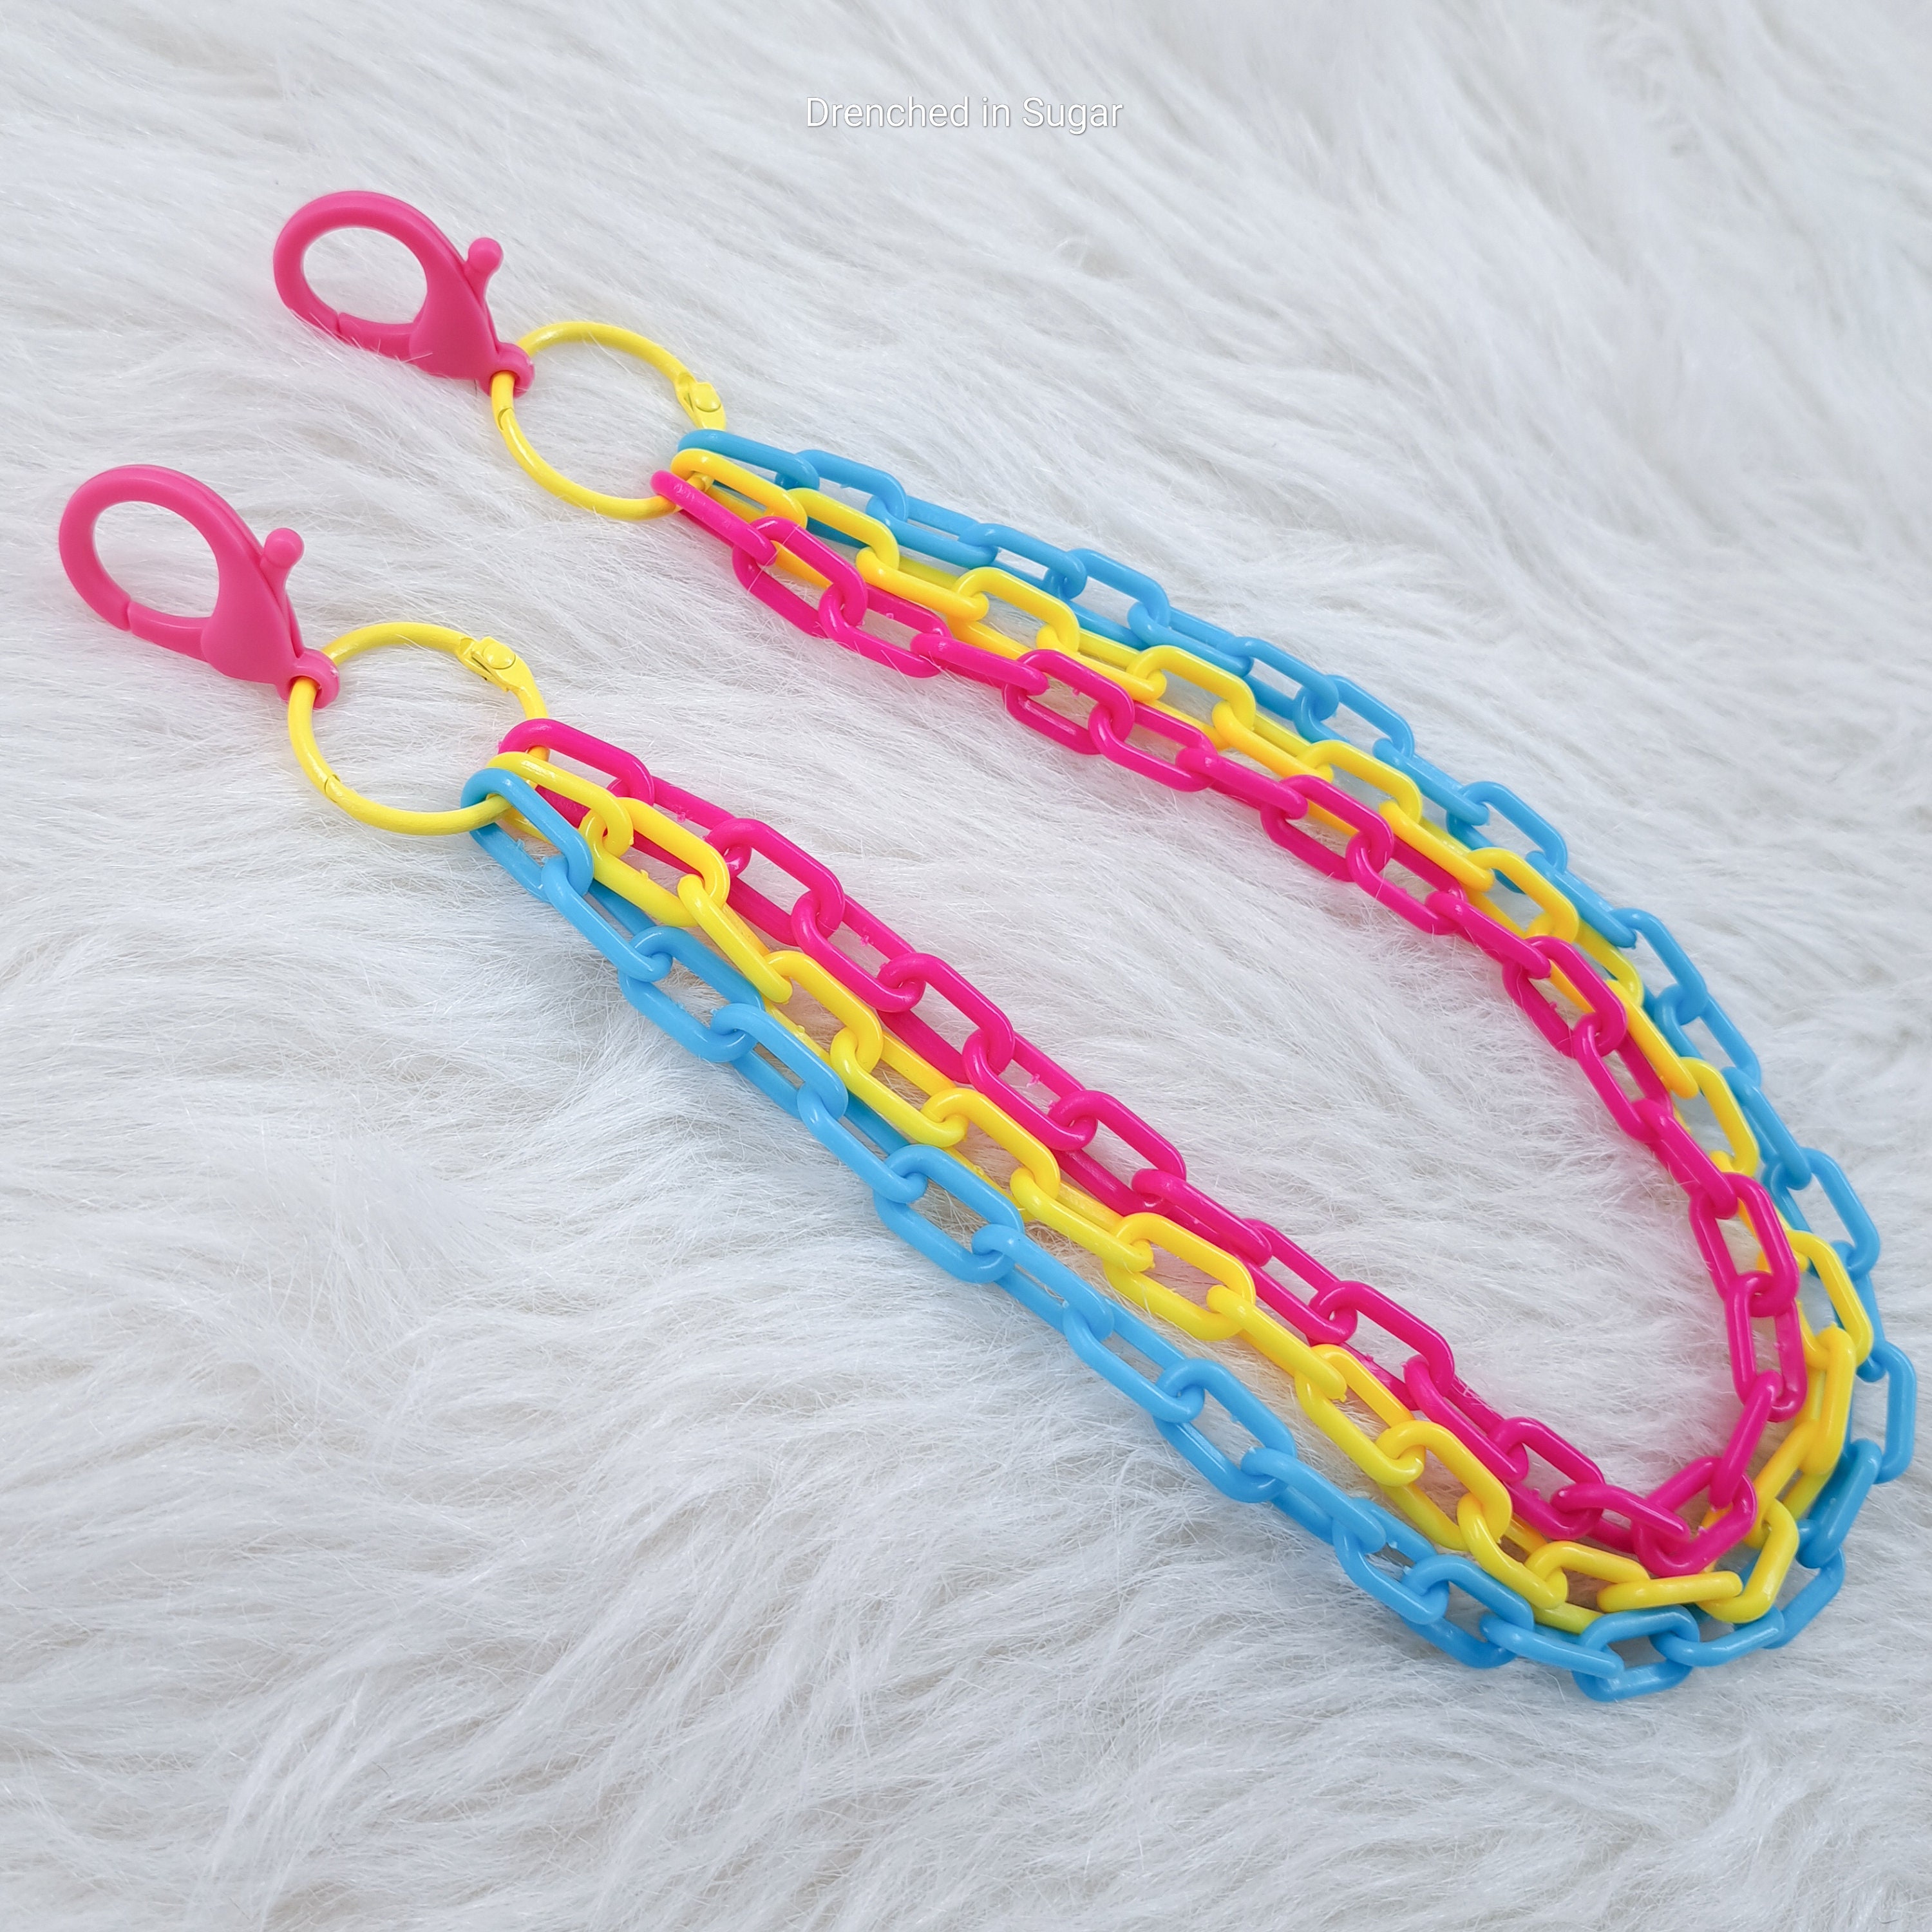 Large Plastic Clip Keychain Findings, Mixed Color 2 50mm DIY Kids Craft  Rainbow Kandi Candy Kawaii Key Chain Clasp Ring Link 